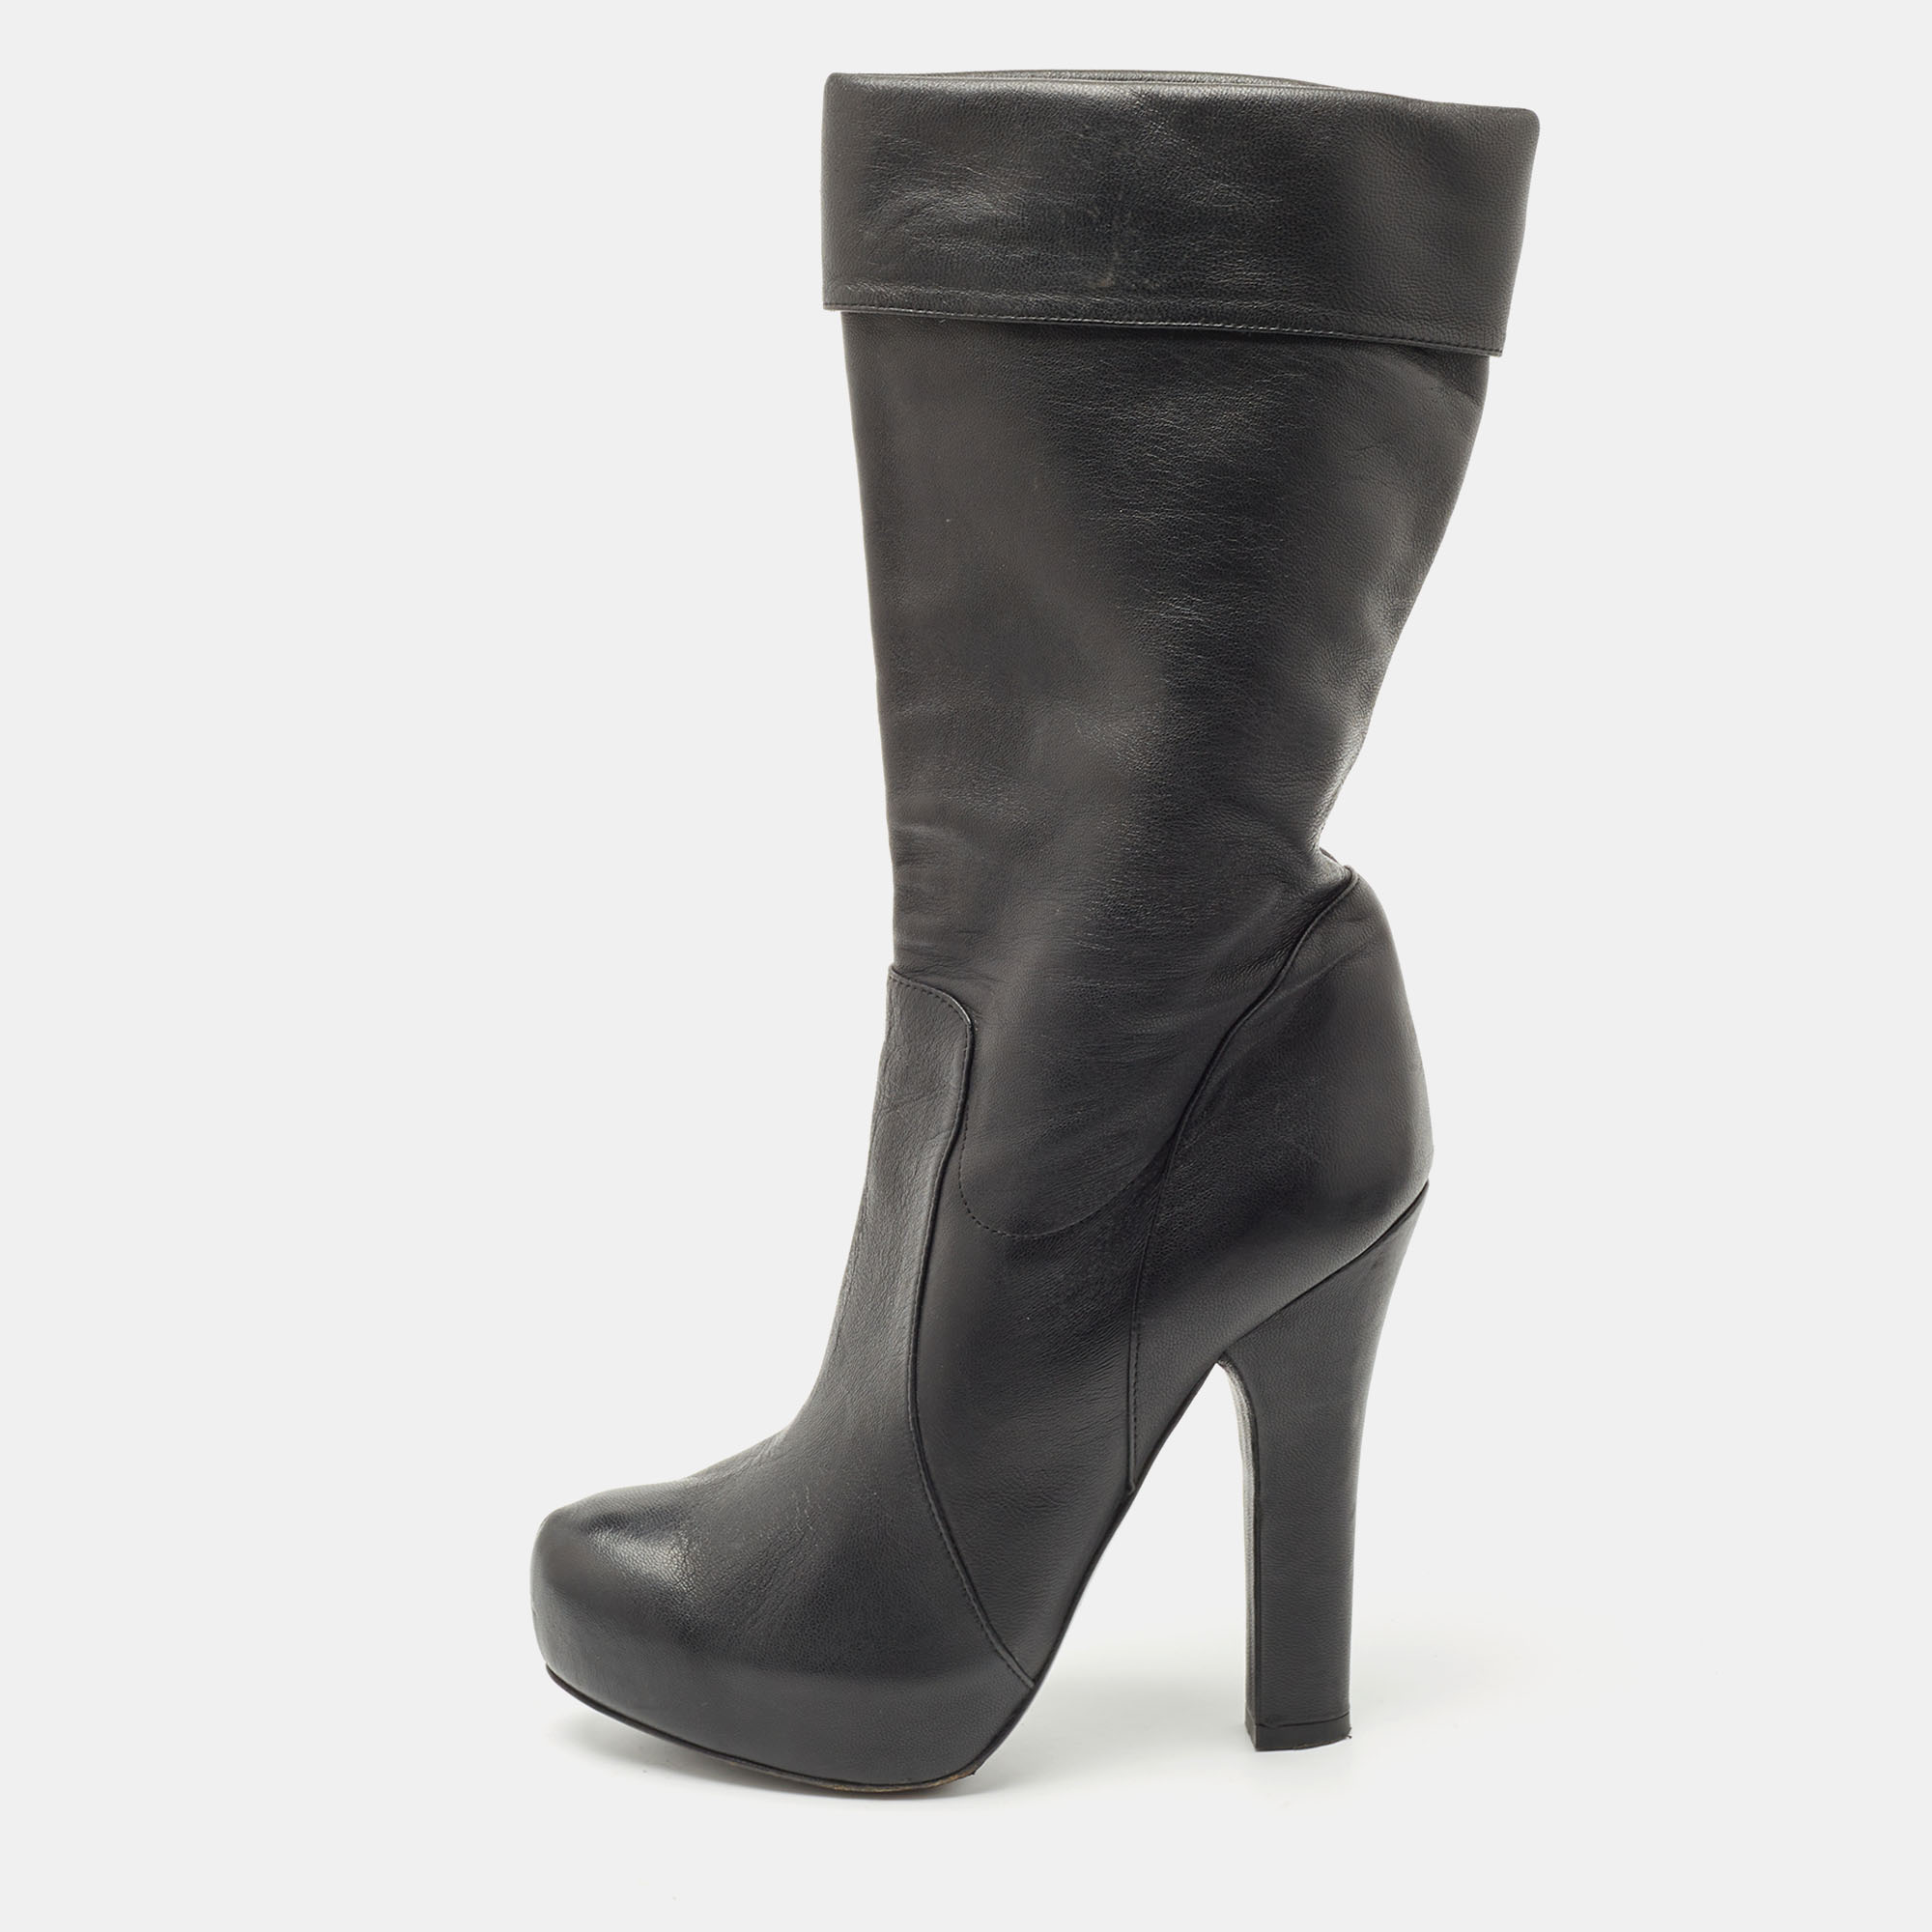 

Dolce & Gabbana Black Leather Calf Length Boots Size